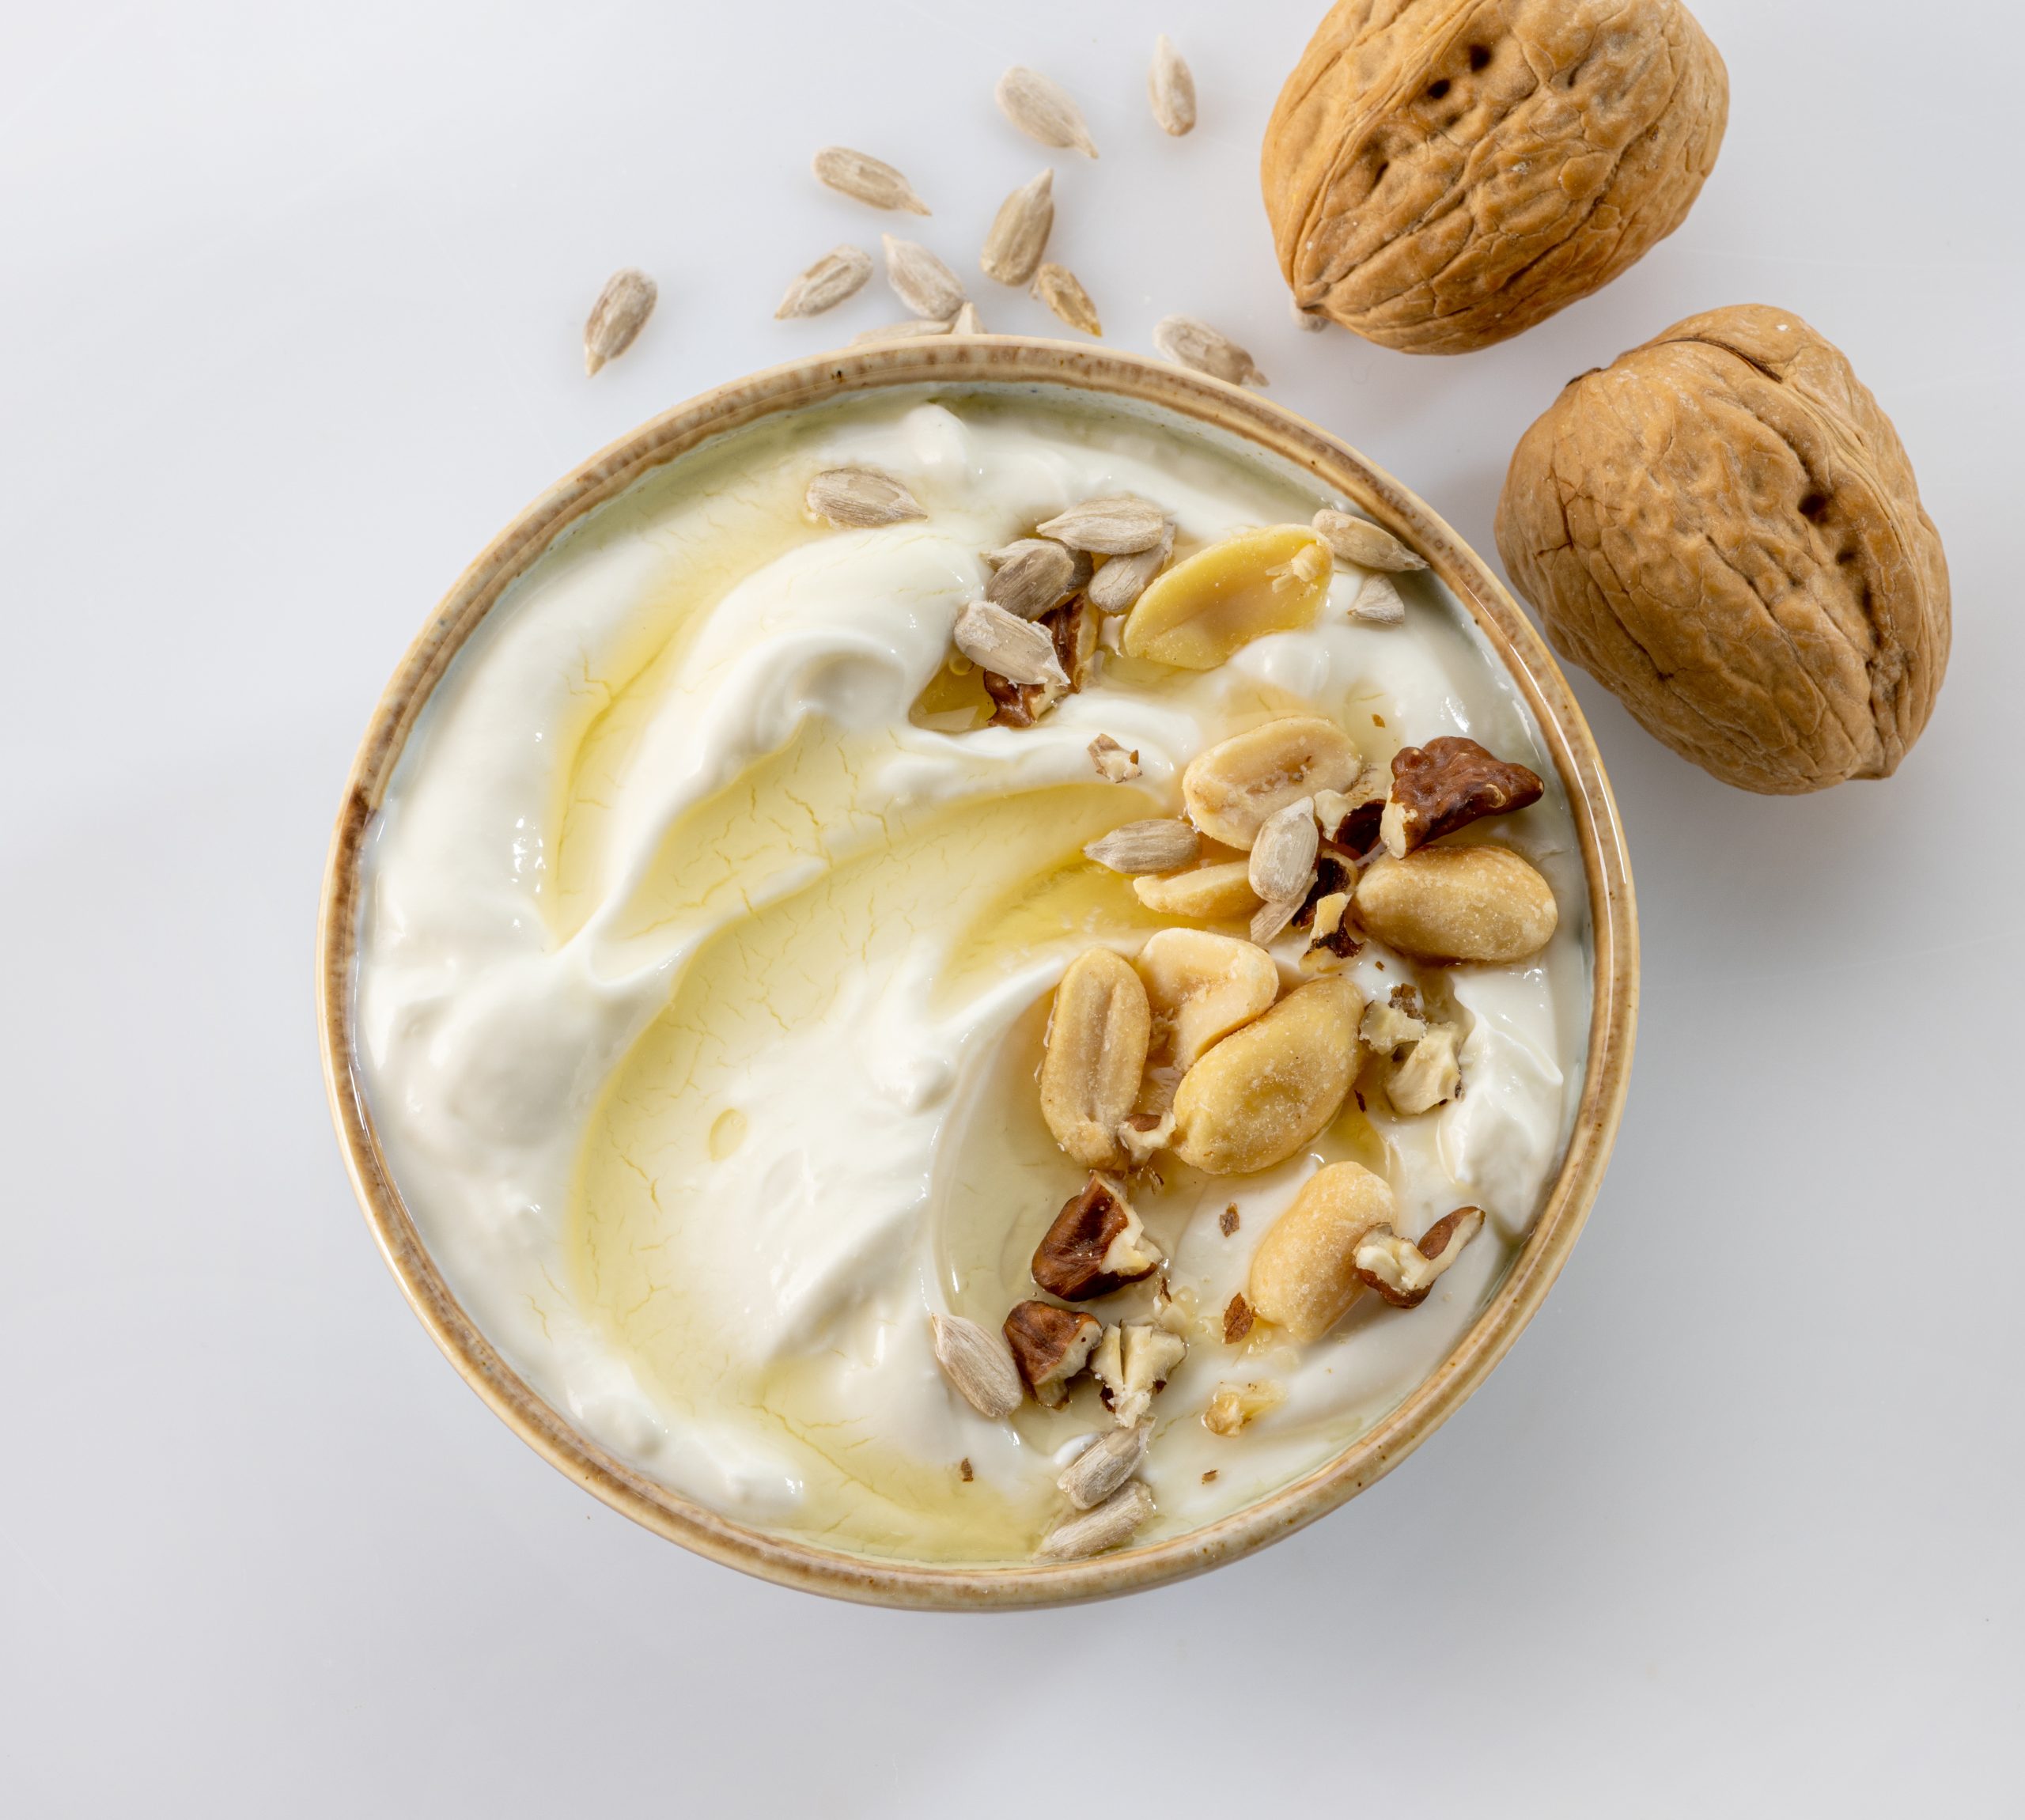 A bowl of creamy keto diet yogurt topped with nuts and seeds, a perfect low-carb snack or breakfast.